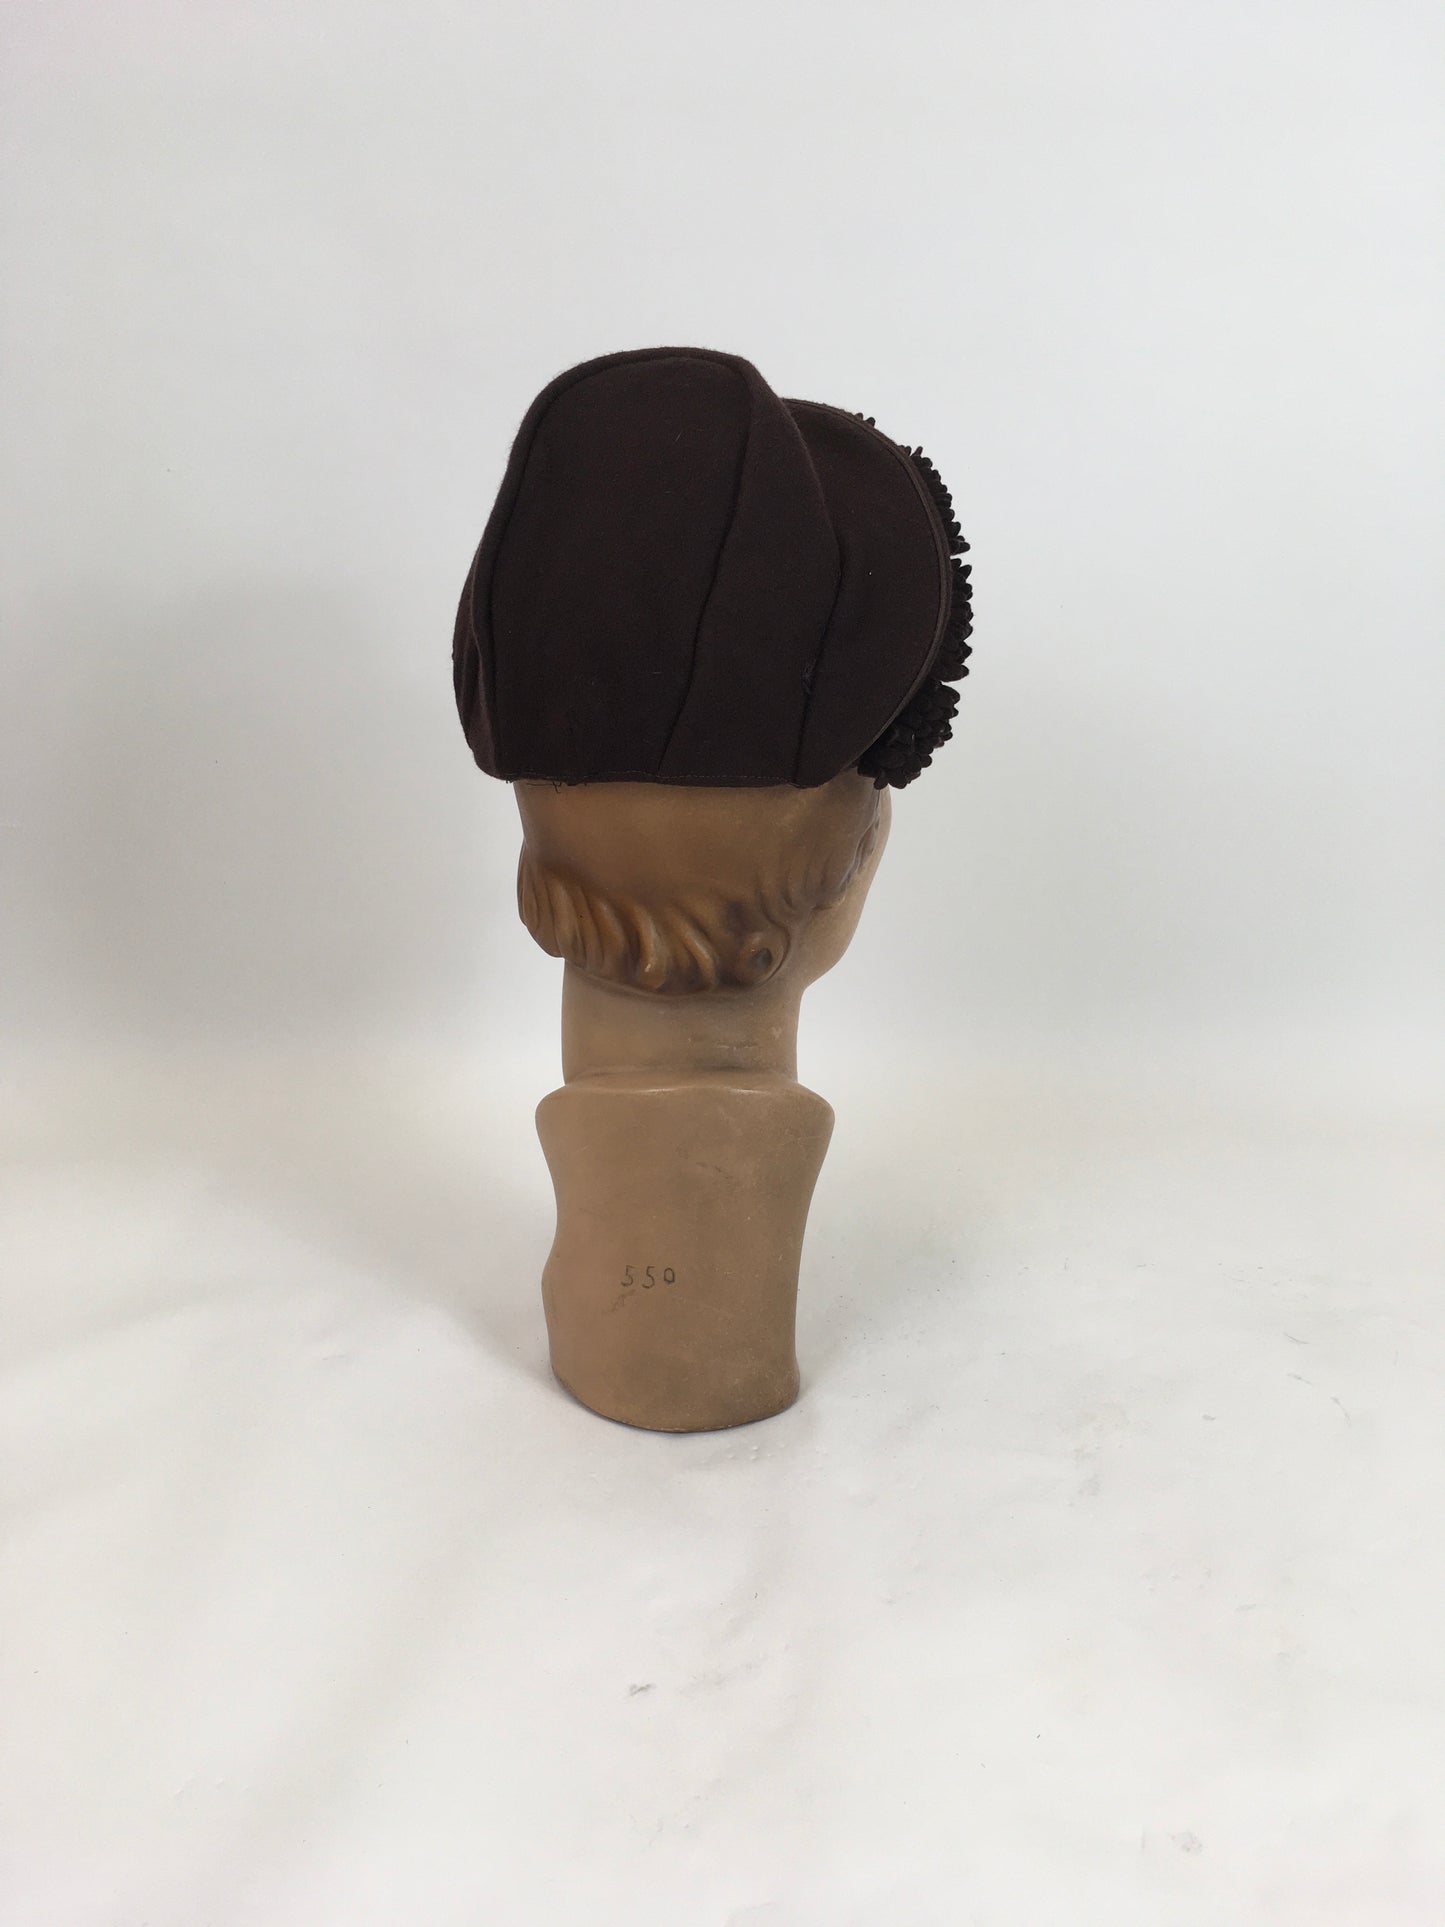 Original 1930's / 1940's Darling Pixie Halo Hat in Chocolate Brown - With Floral Adornment